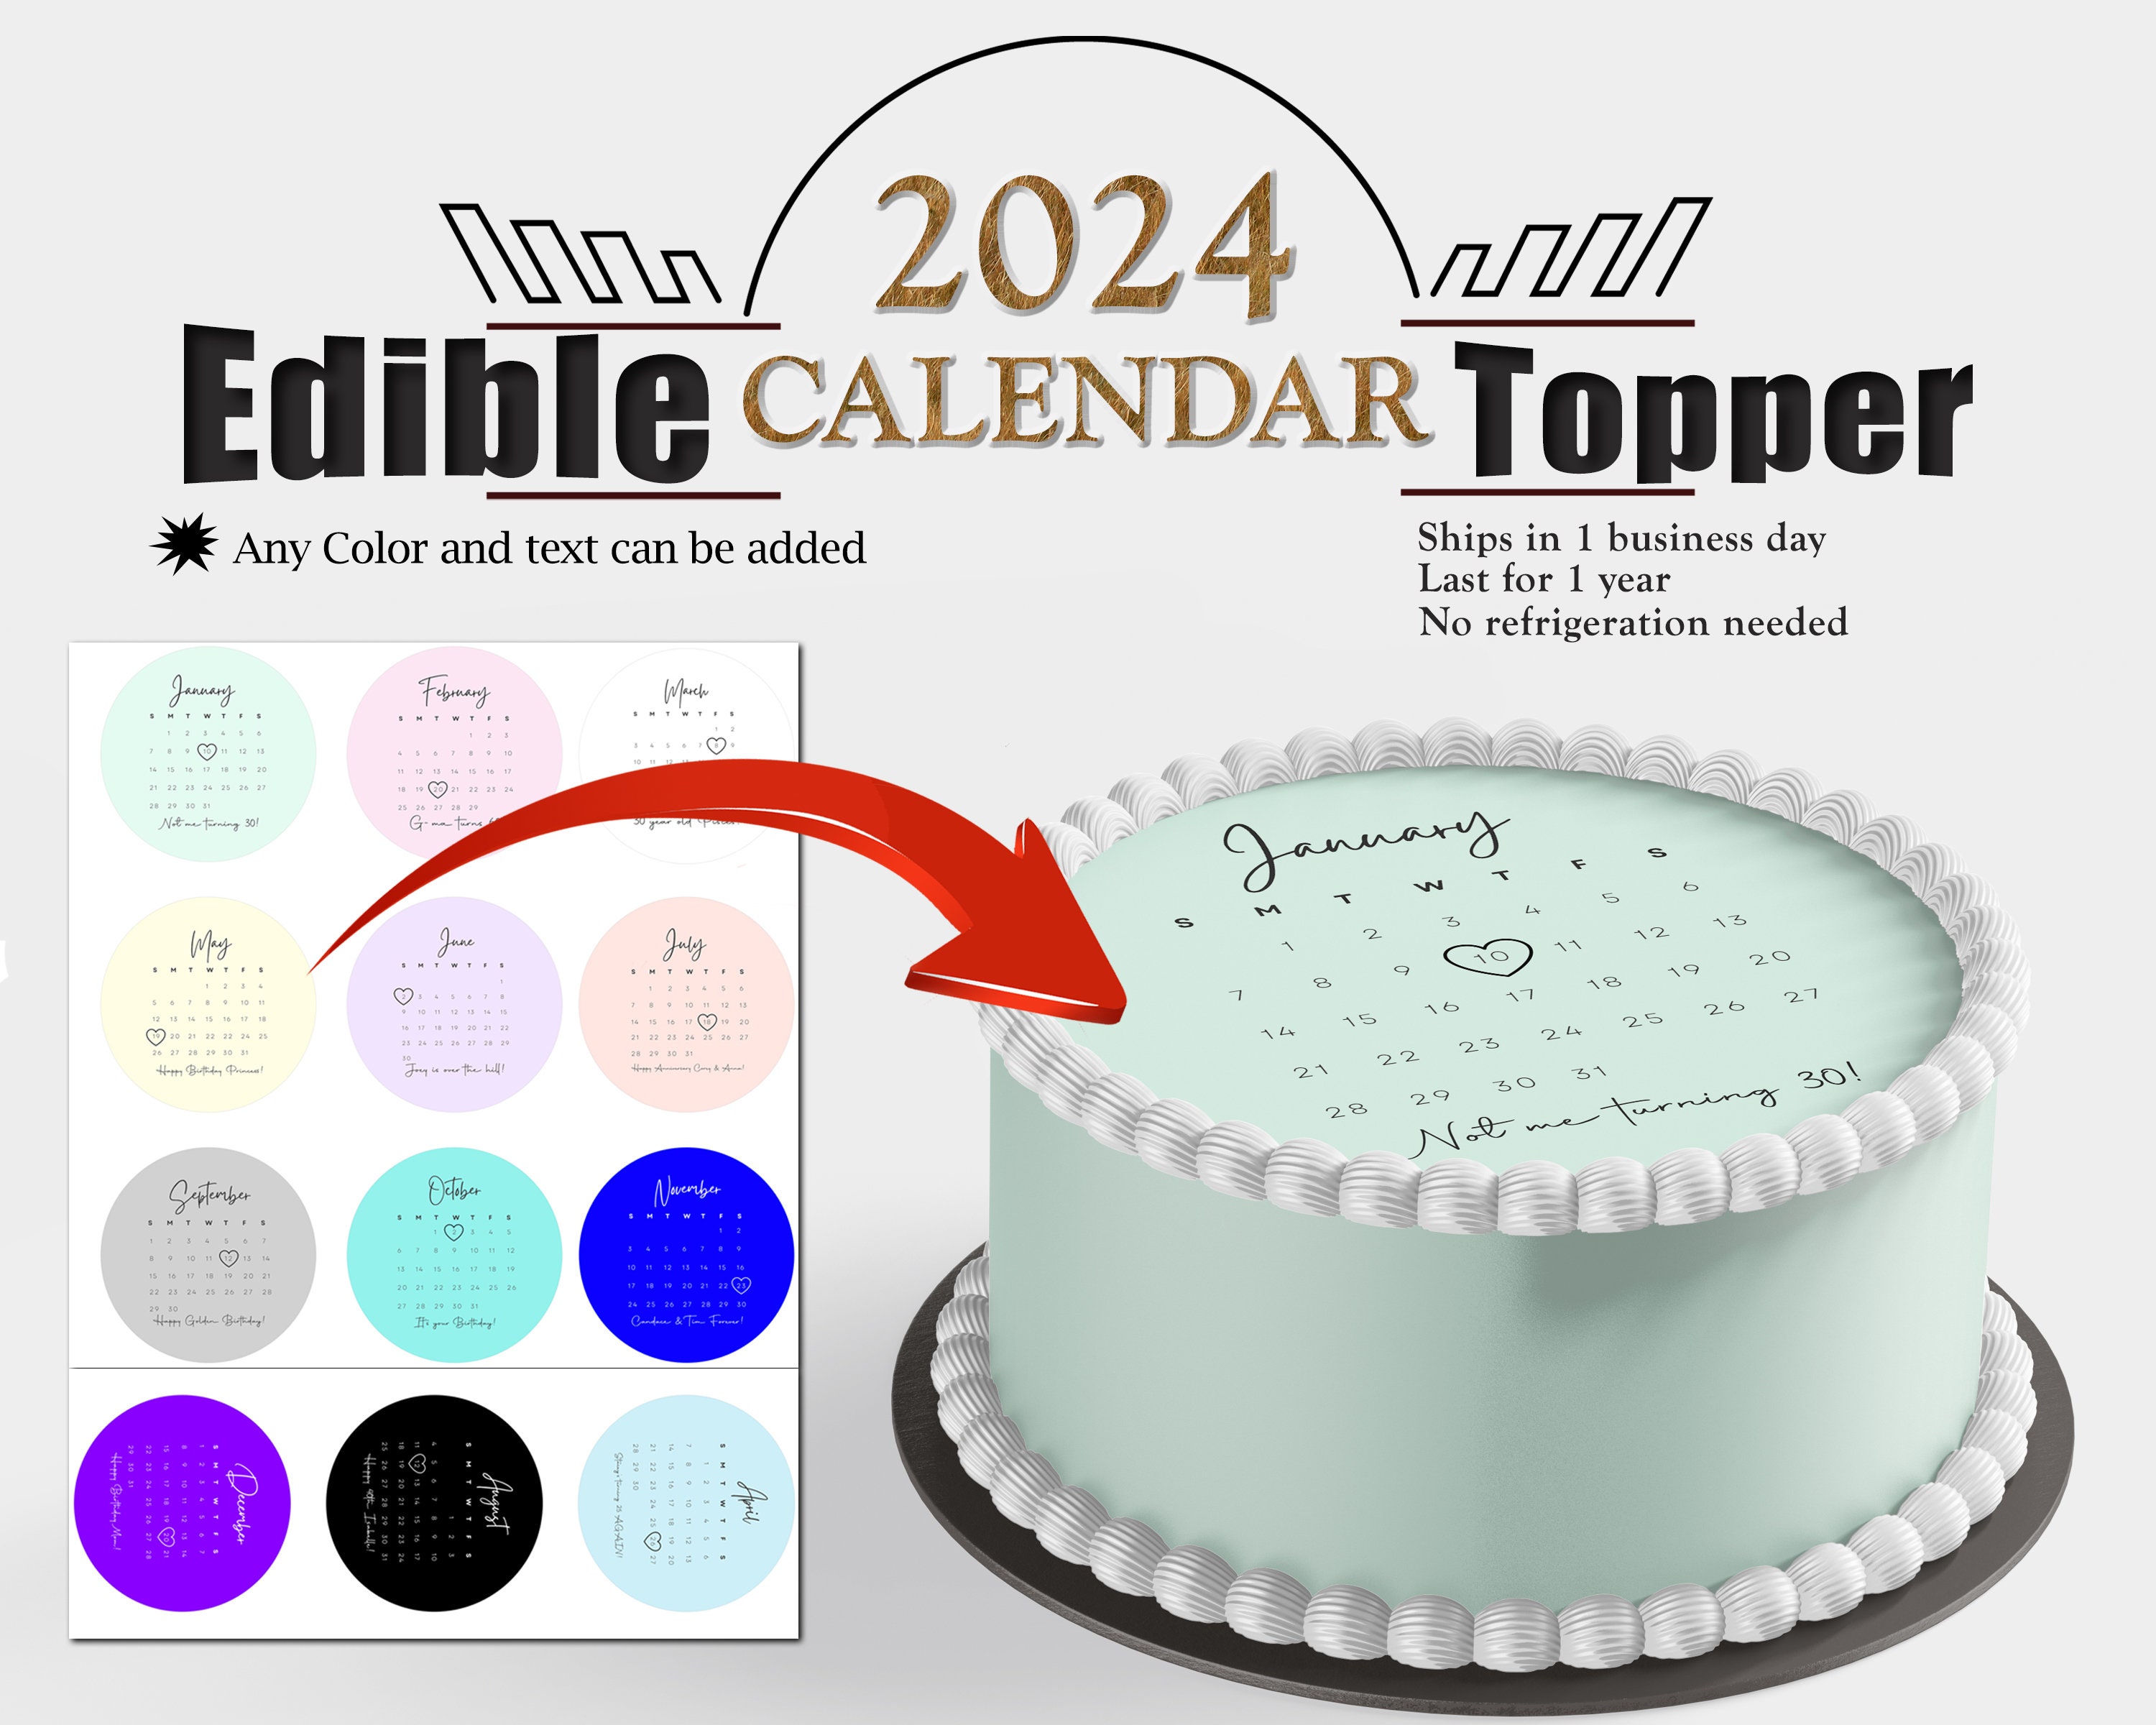 24 Pre-Cut Round 2024 Bright New Year's Eve Edible Wafer Paper Cake Toppers